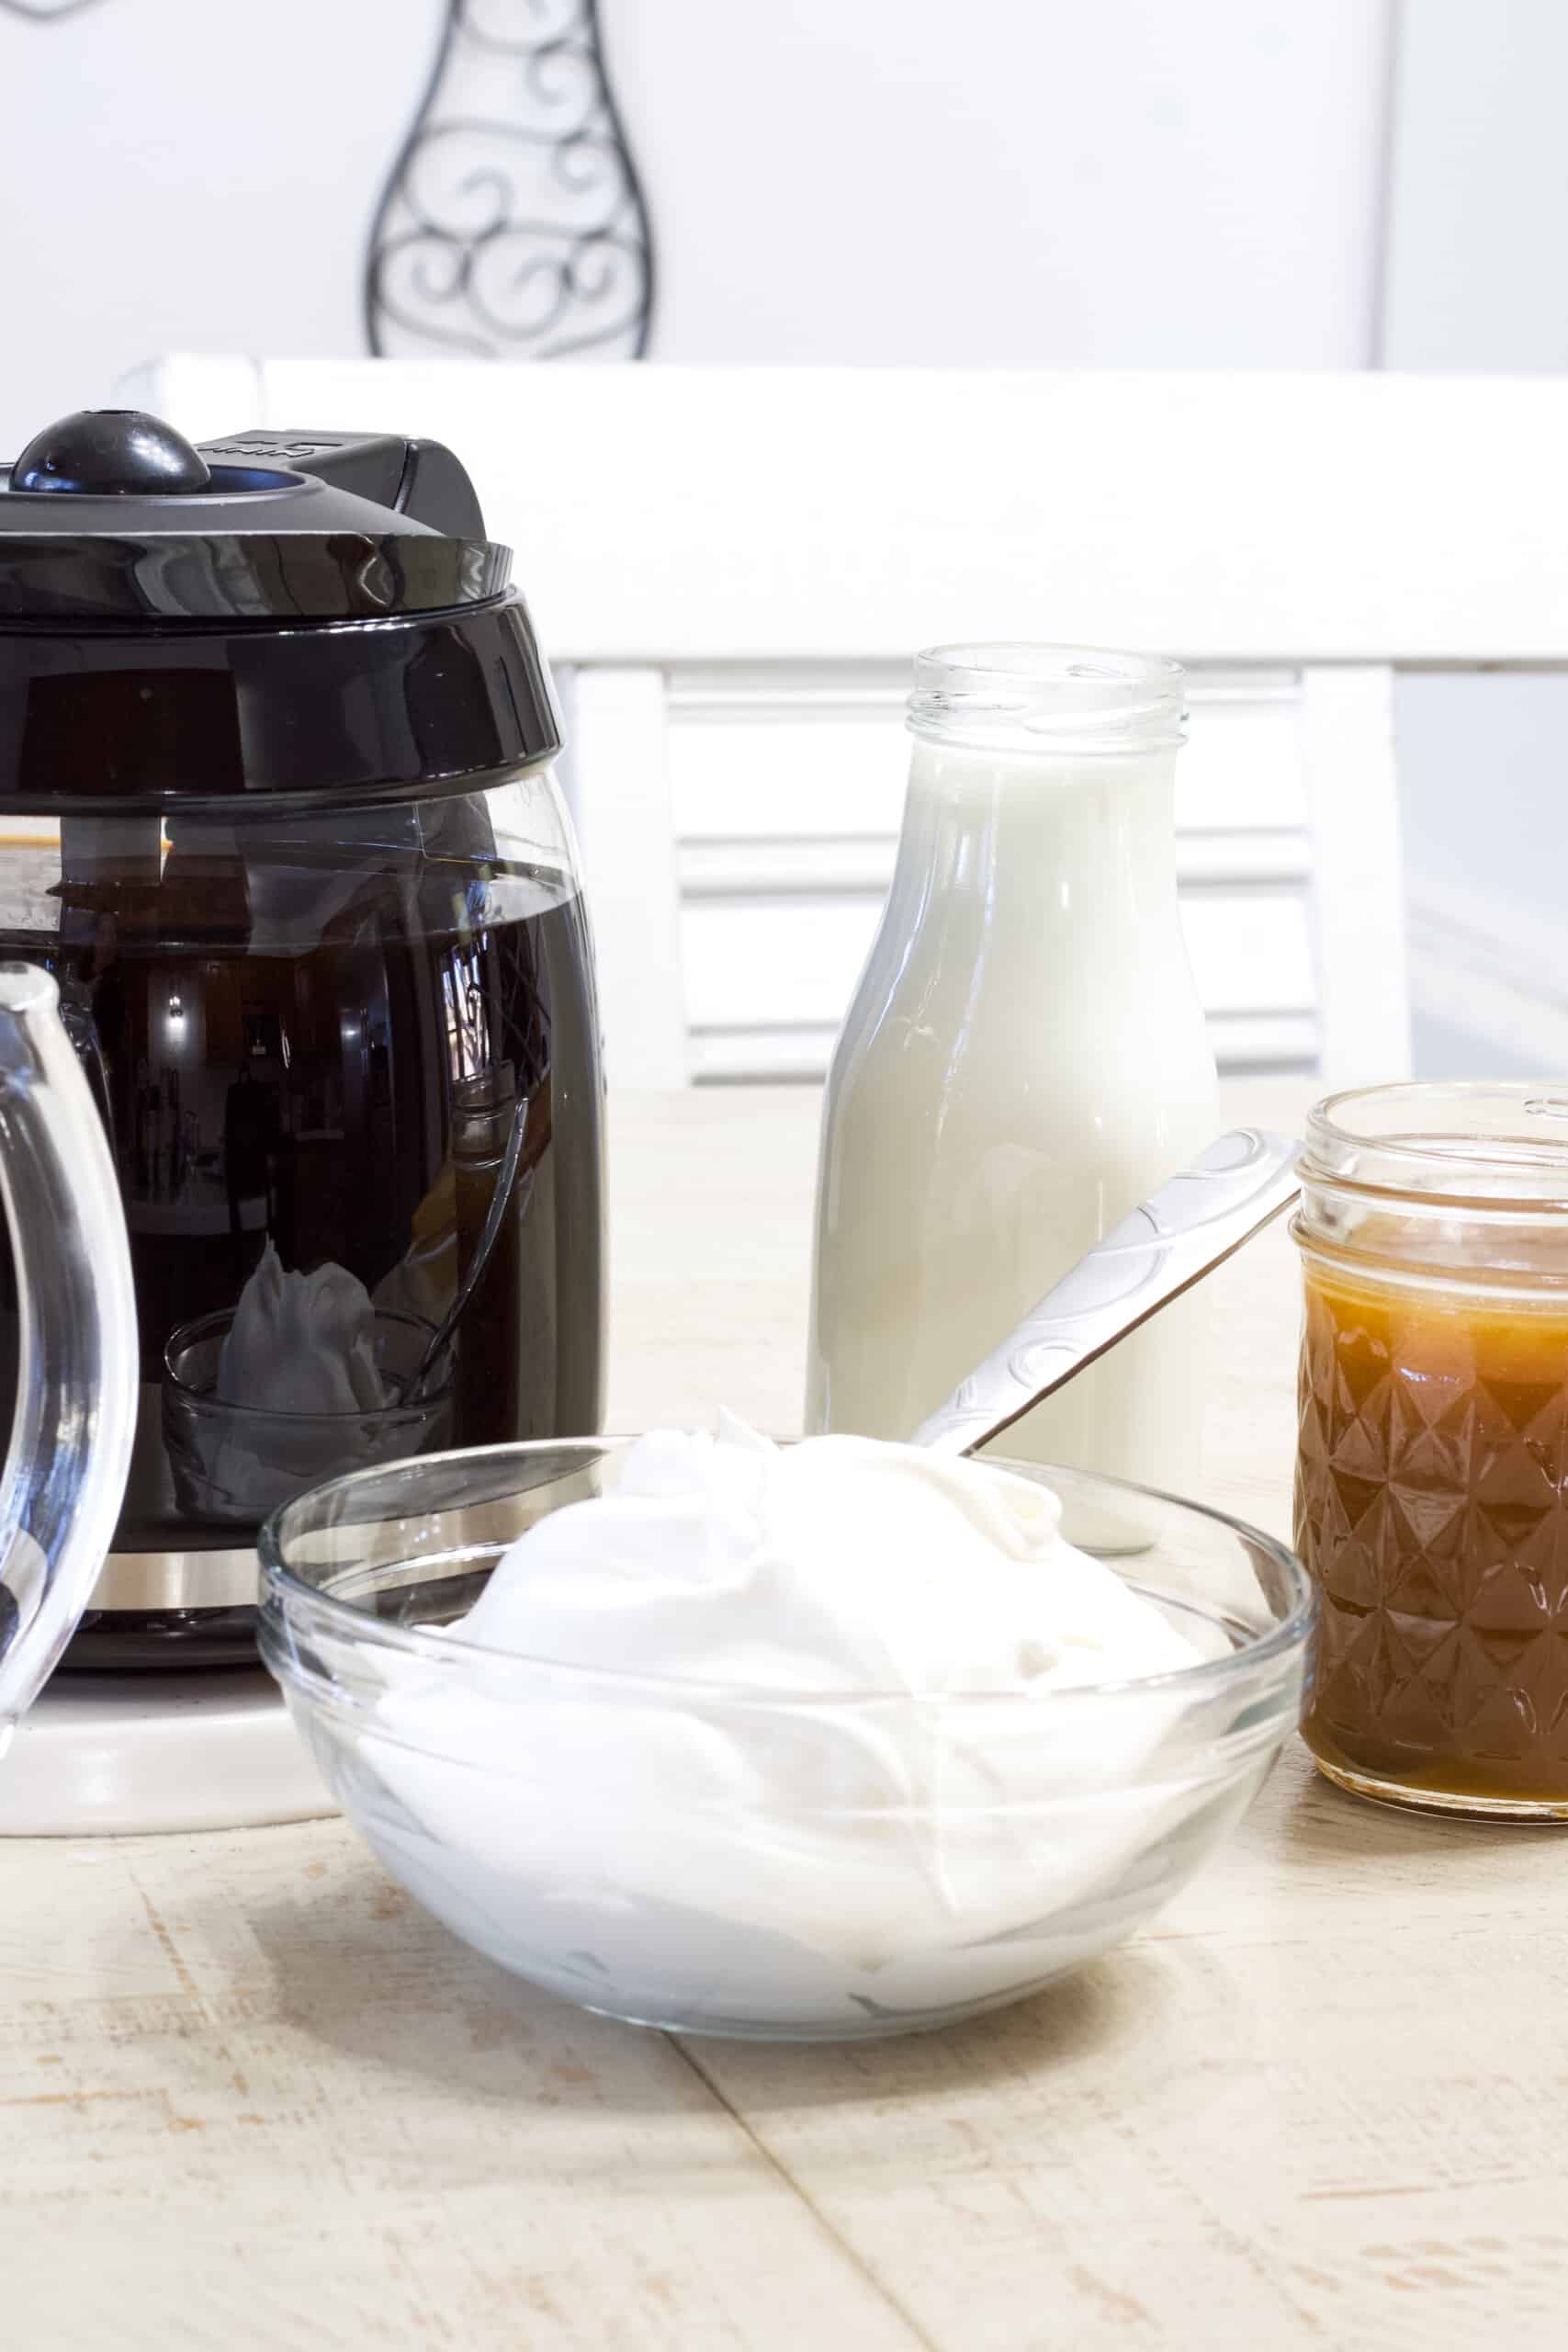 A pot of black coffee, a bottle of milk, a bowl of whipped cream and a jar of caramel sauce.